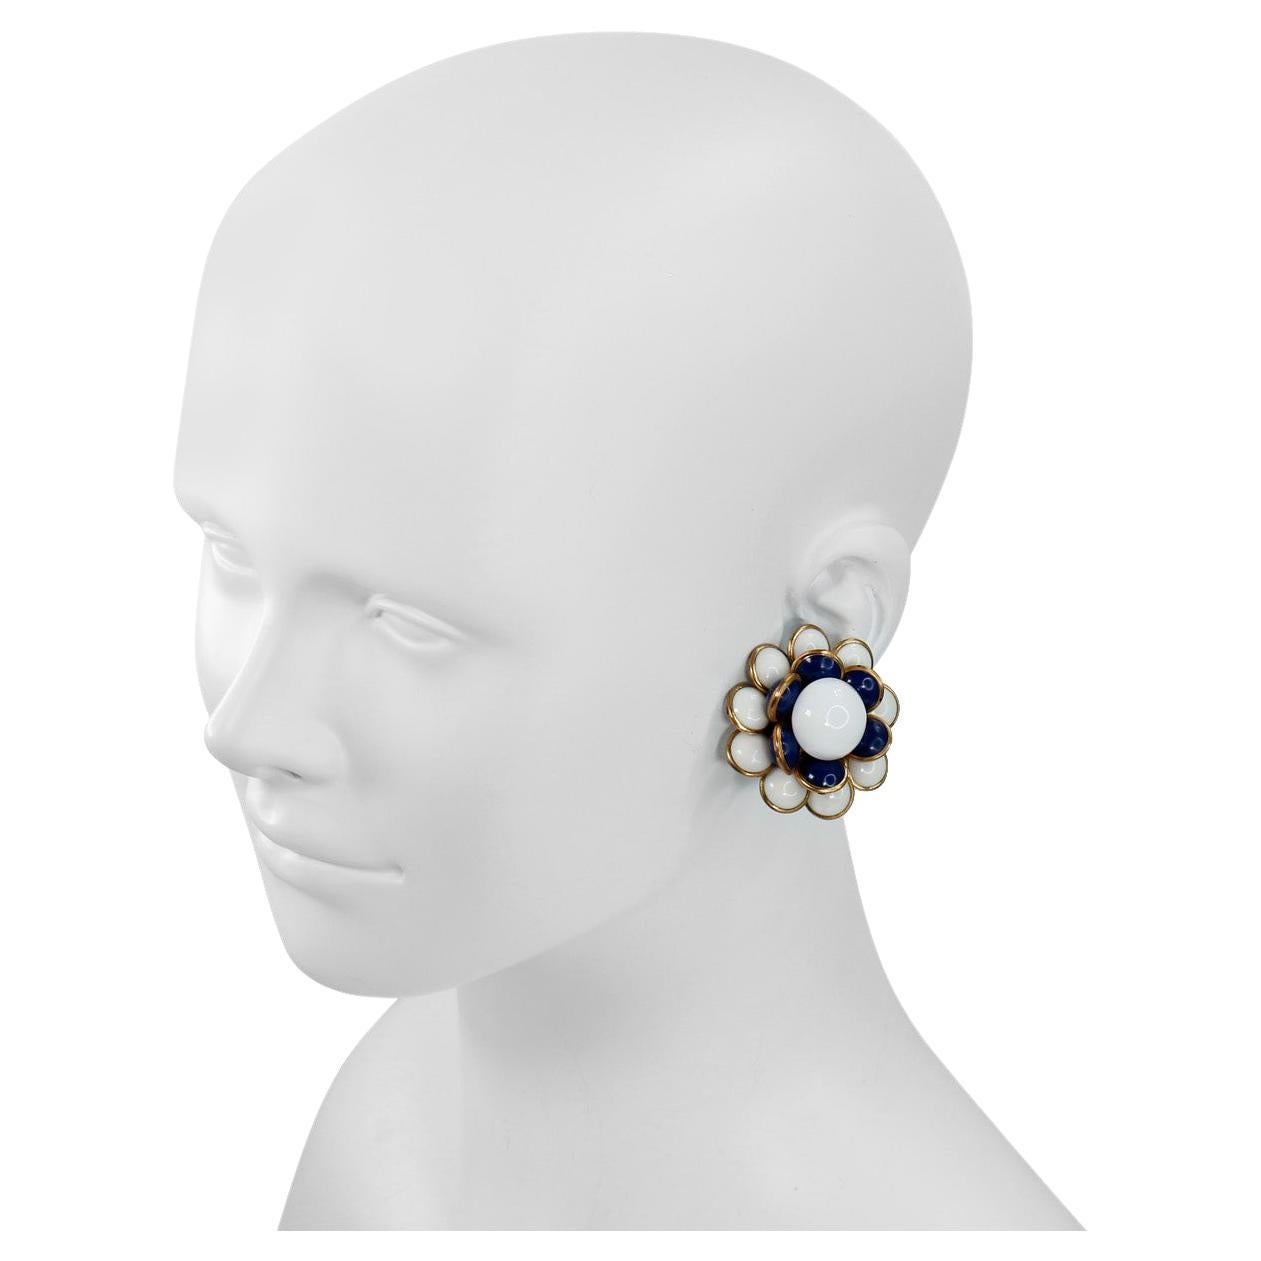 Vintage Gripoix Navy, White and Gold Flower Earrings. Layered upward and 3D. Clip On.

Guy de Maupassant wrote a famous story about a necklace. The story is about a young, pretty, intelligent, well educated but poorly endowed bride who has to marry